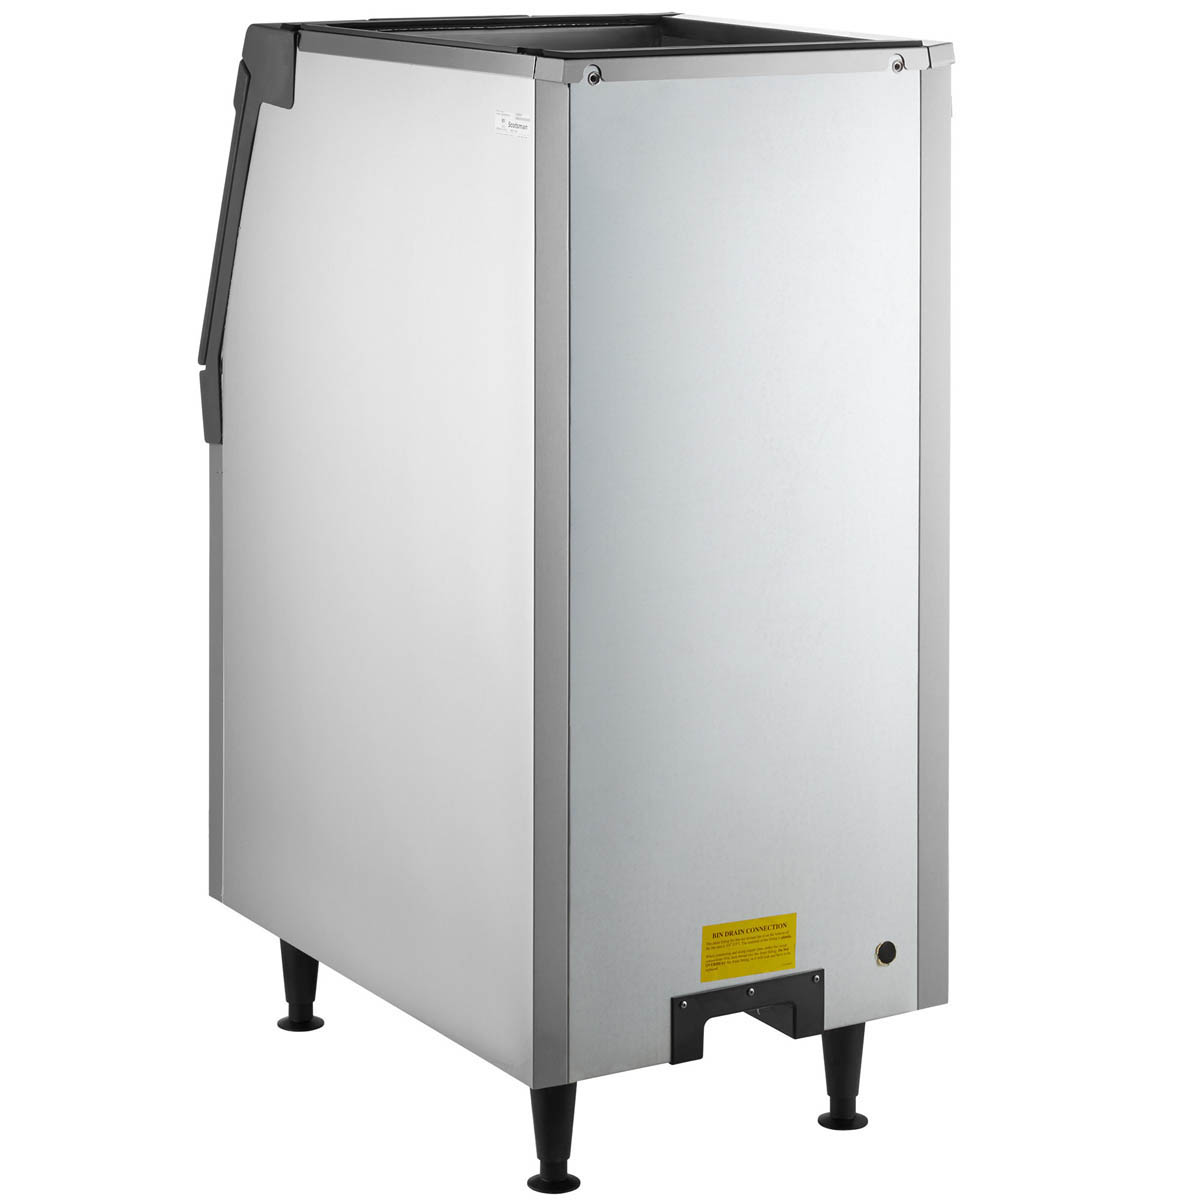 Scotsman B322S Is An Effective Way To Keep Your Ice Supply Cool and Available, Chef's Deal